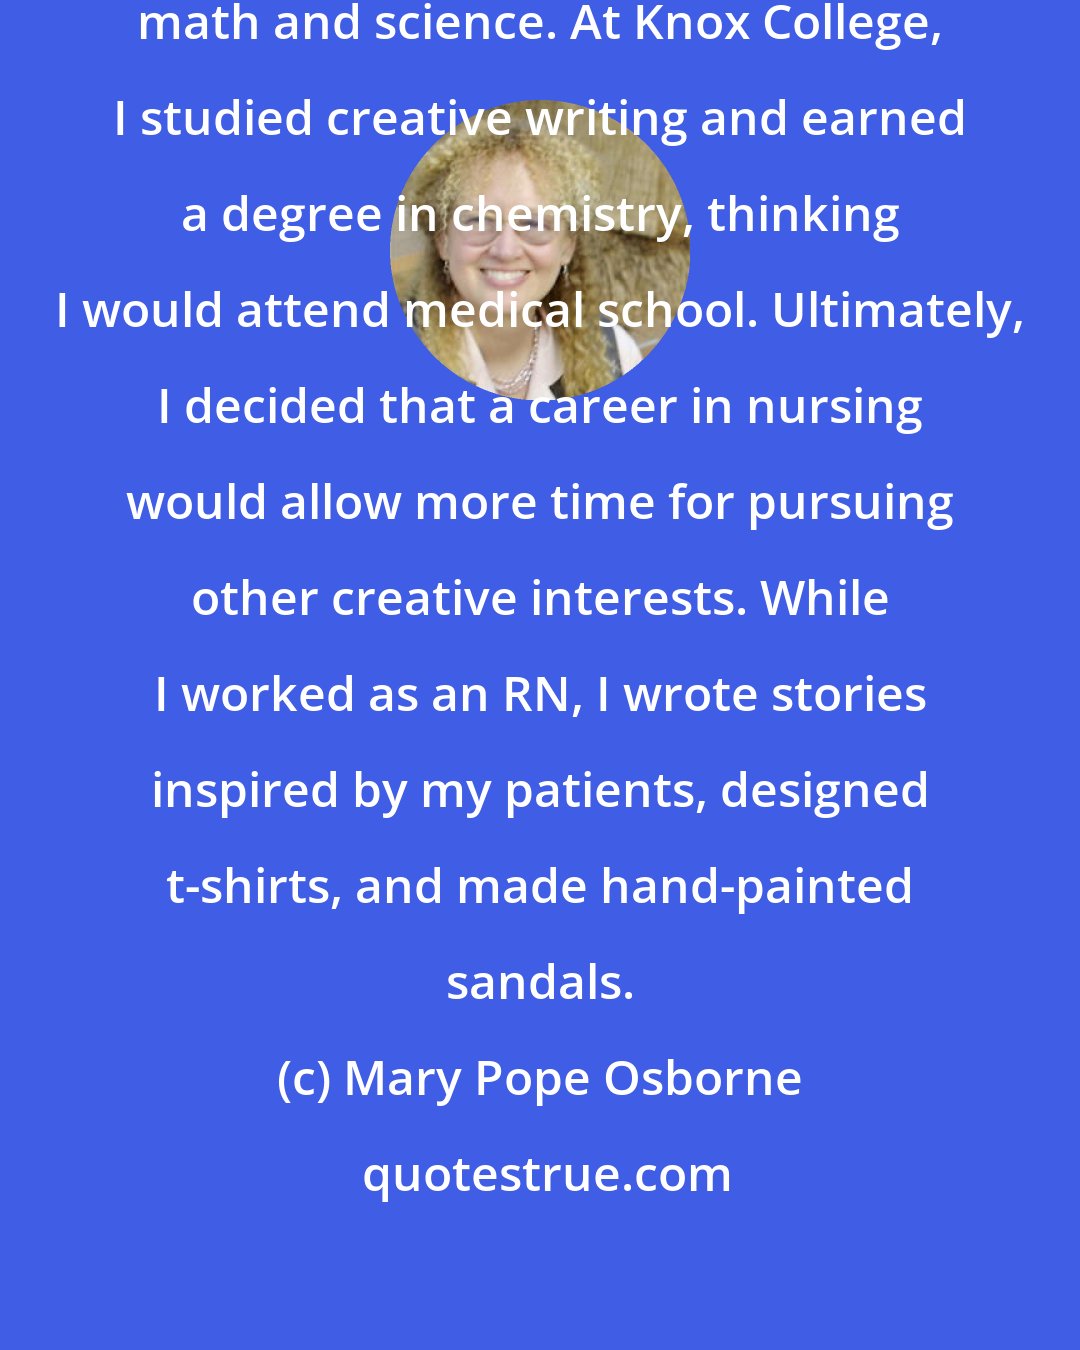 Mary Pope Osborne: hough I was creative, I also liked math and science. At Knox College, I studied creative writing and earned a degree in chemistry, thinking I would attend medical school. Ultimately, I decided that a career in nursing would allow more time for pursuing other creative interests. While I worked as an RN, I wrote stories inspired by my patients, designed t-shirts, and made hand-painted sandals.